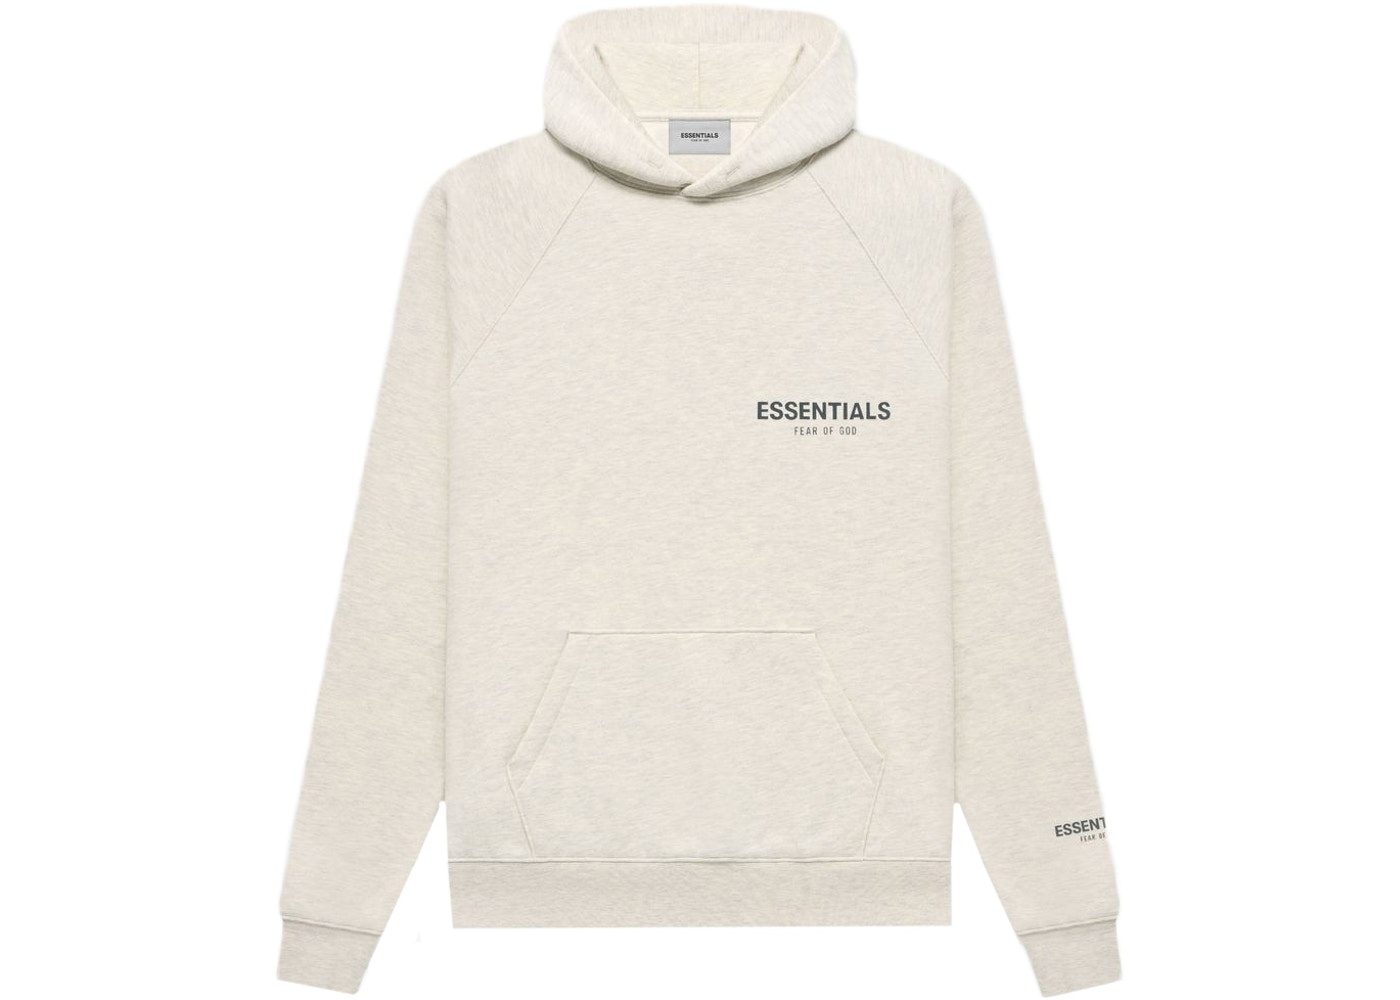 Fear of God Essentials Pullover Hoodie Light Oatmeal